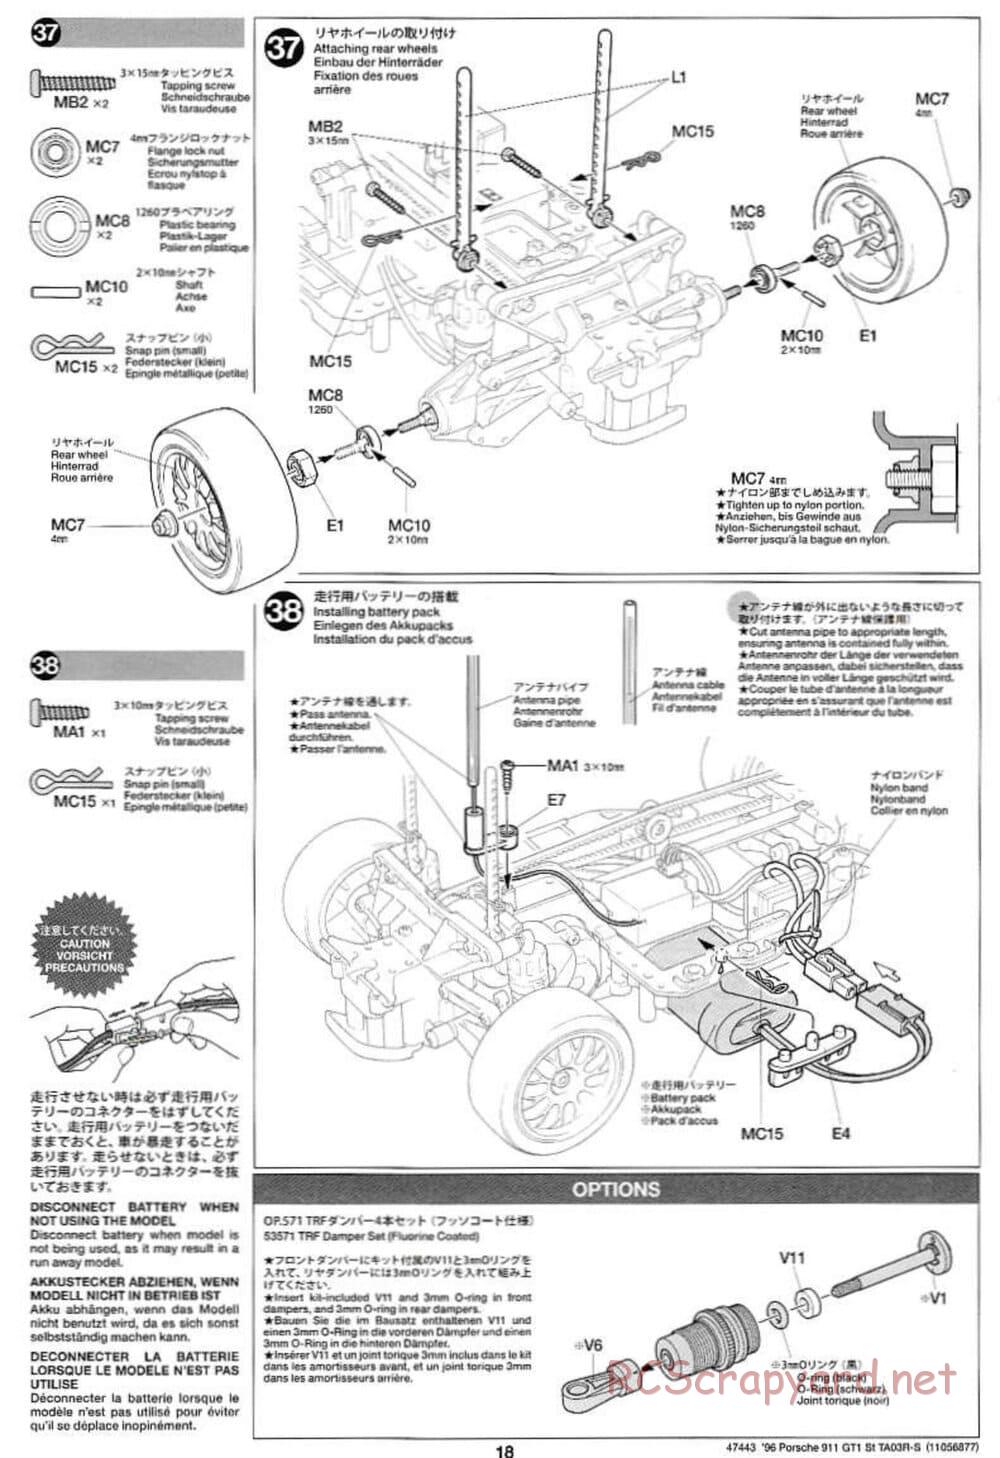 Tamiya - Porsche 911 GT1 Street - TA-03RS Chassis - Manual - Page 18